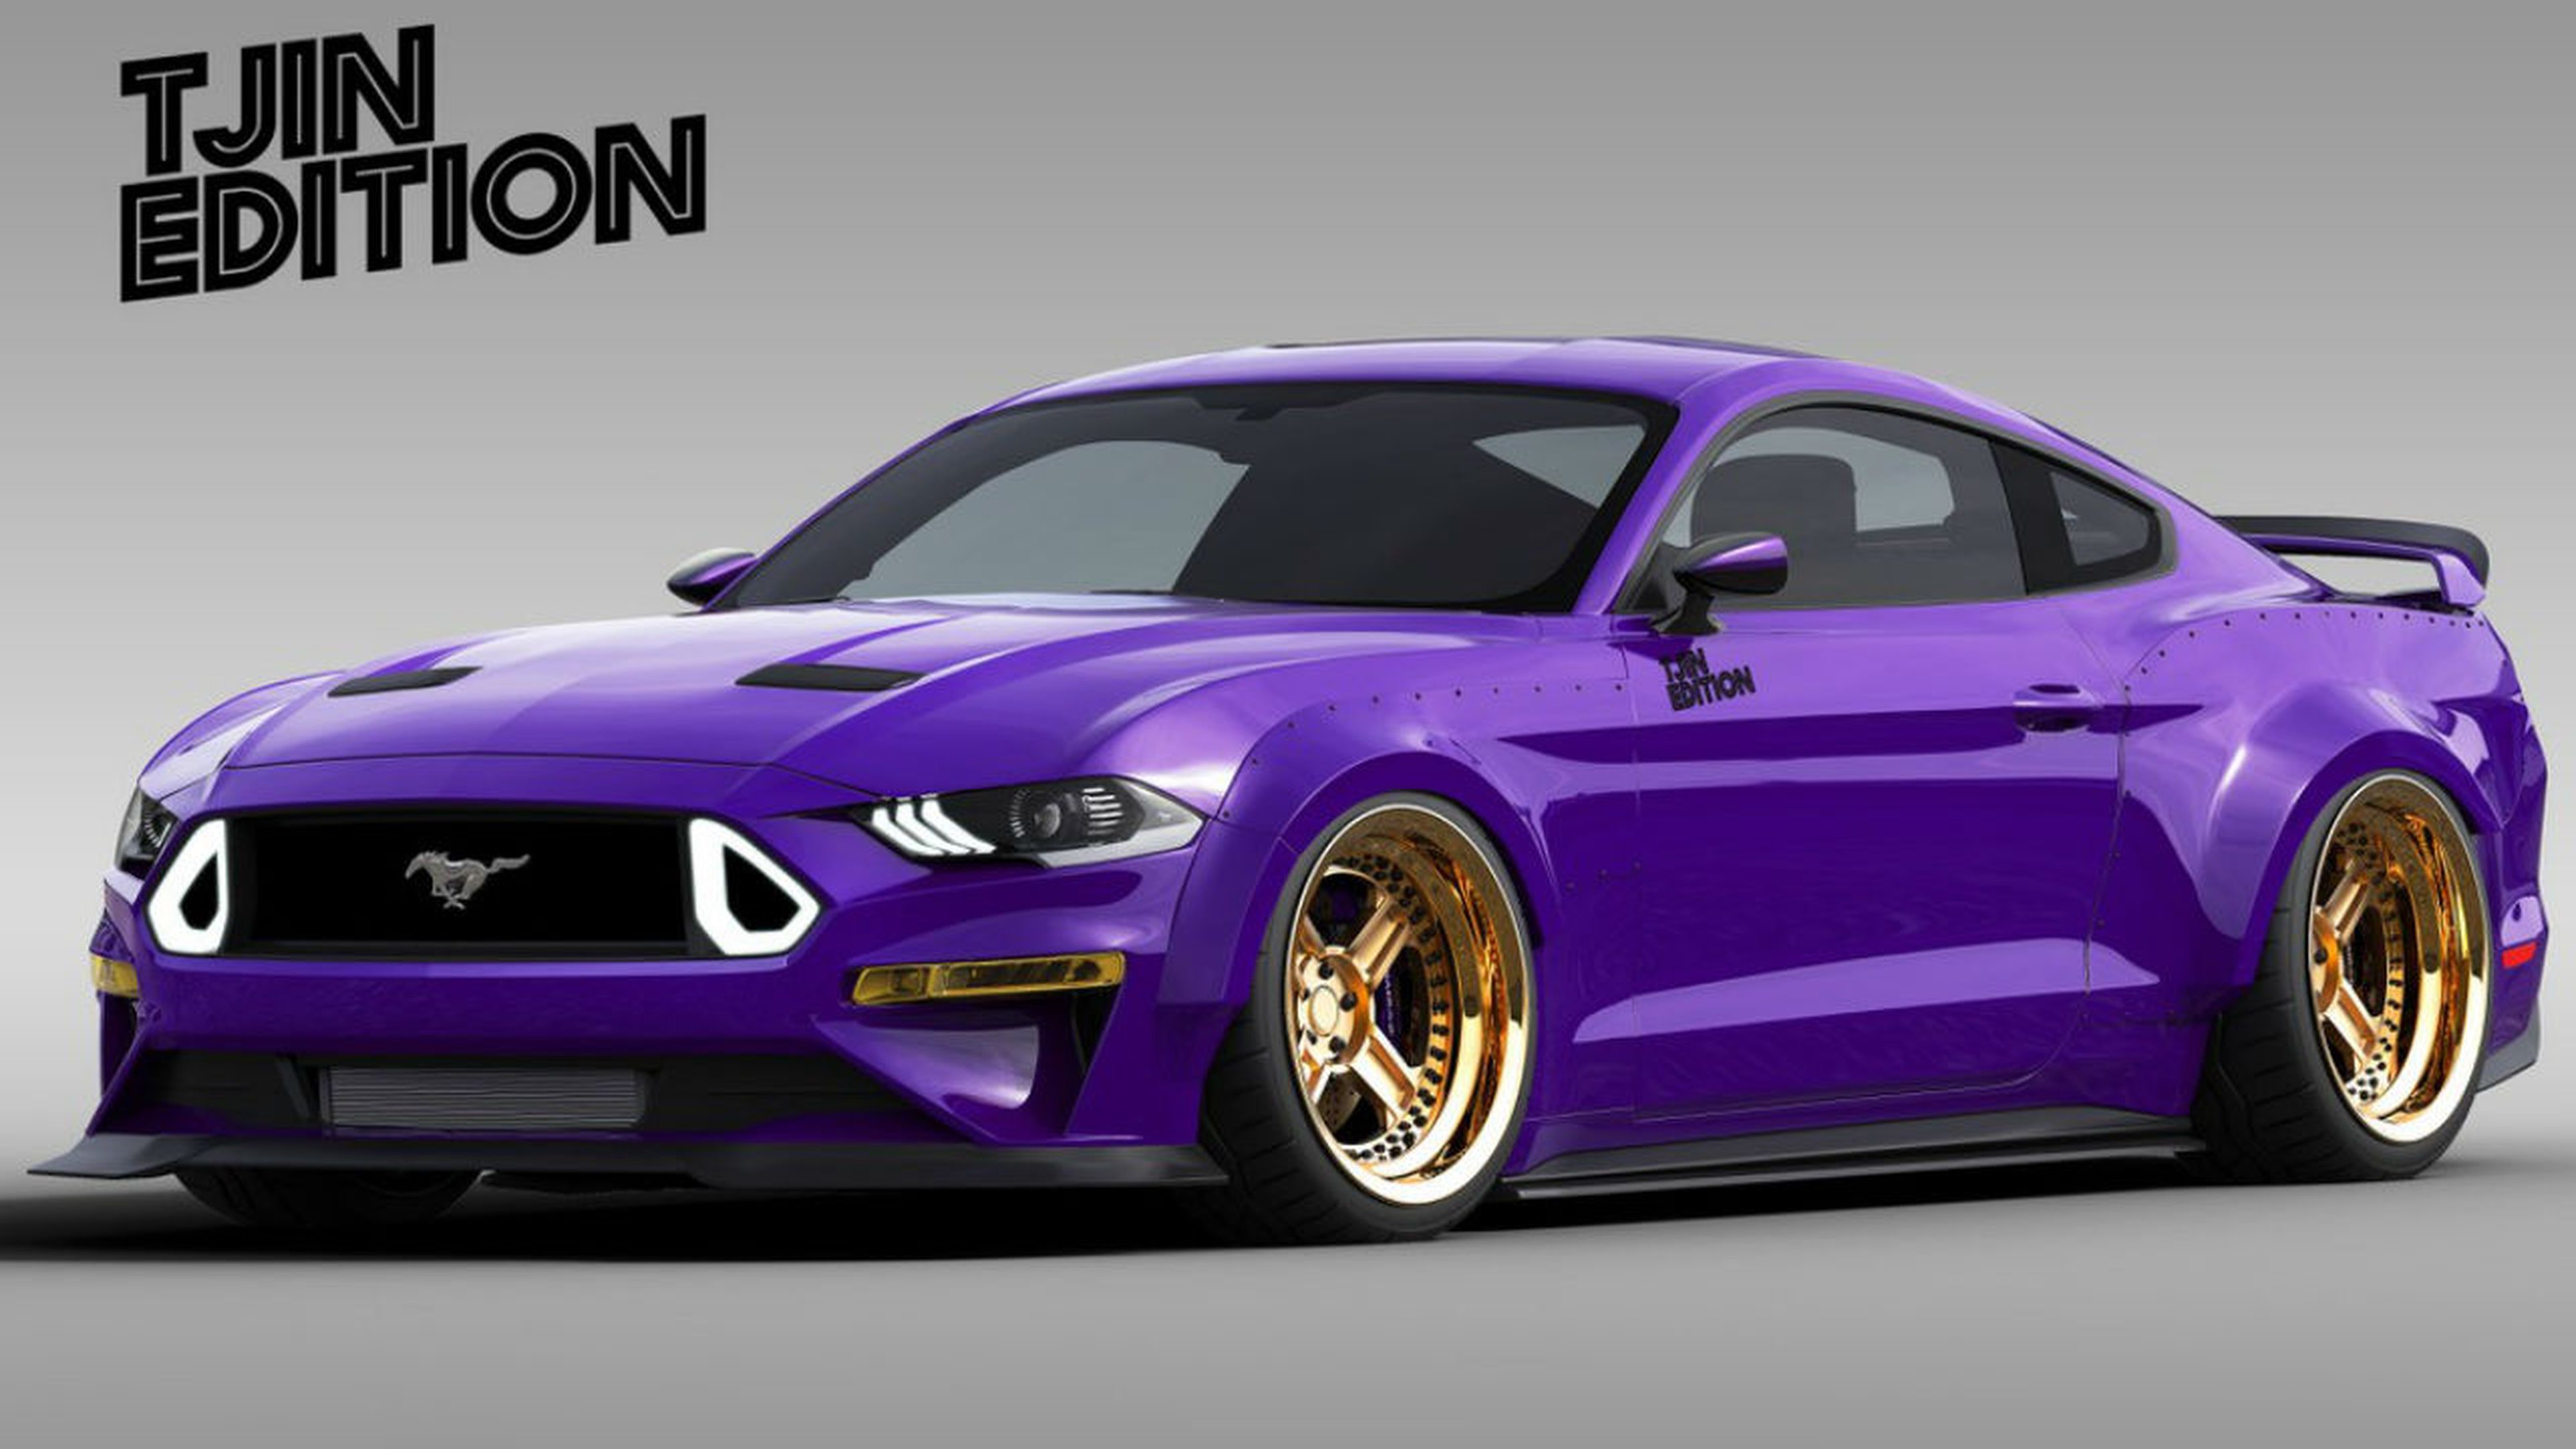 Ford Mustang Tjin Edition